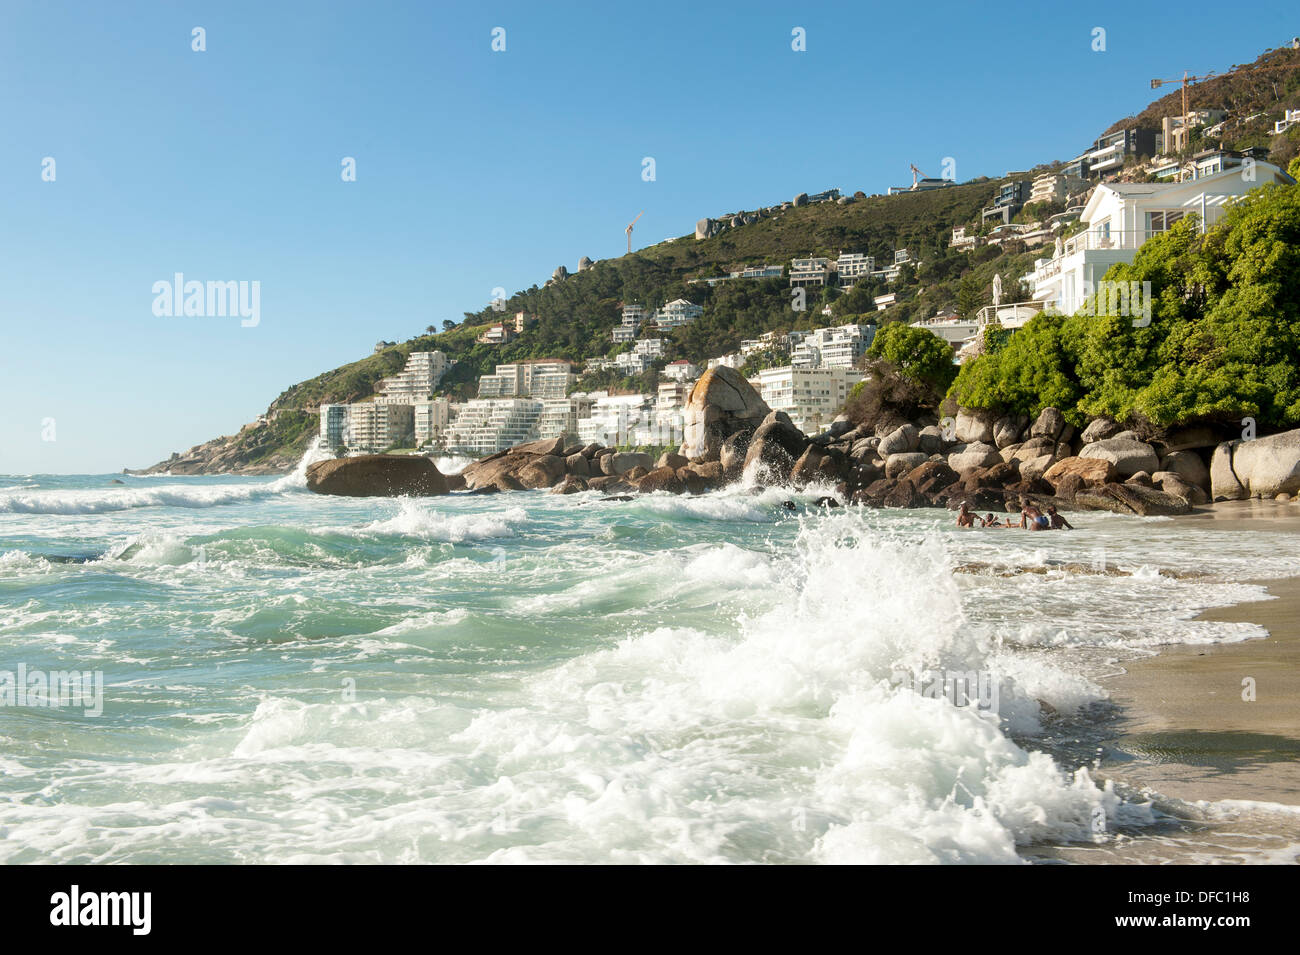 Residents enjoy swimming at Clifton 3rd beach, Cape Town, South Africa Stock Photo